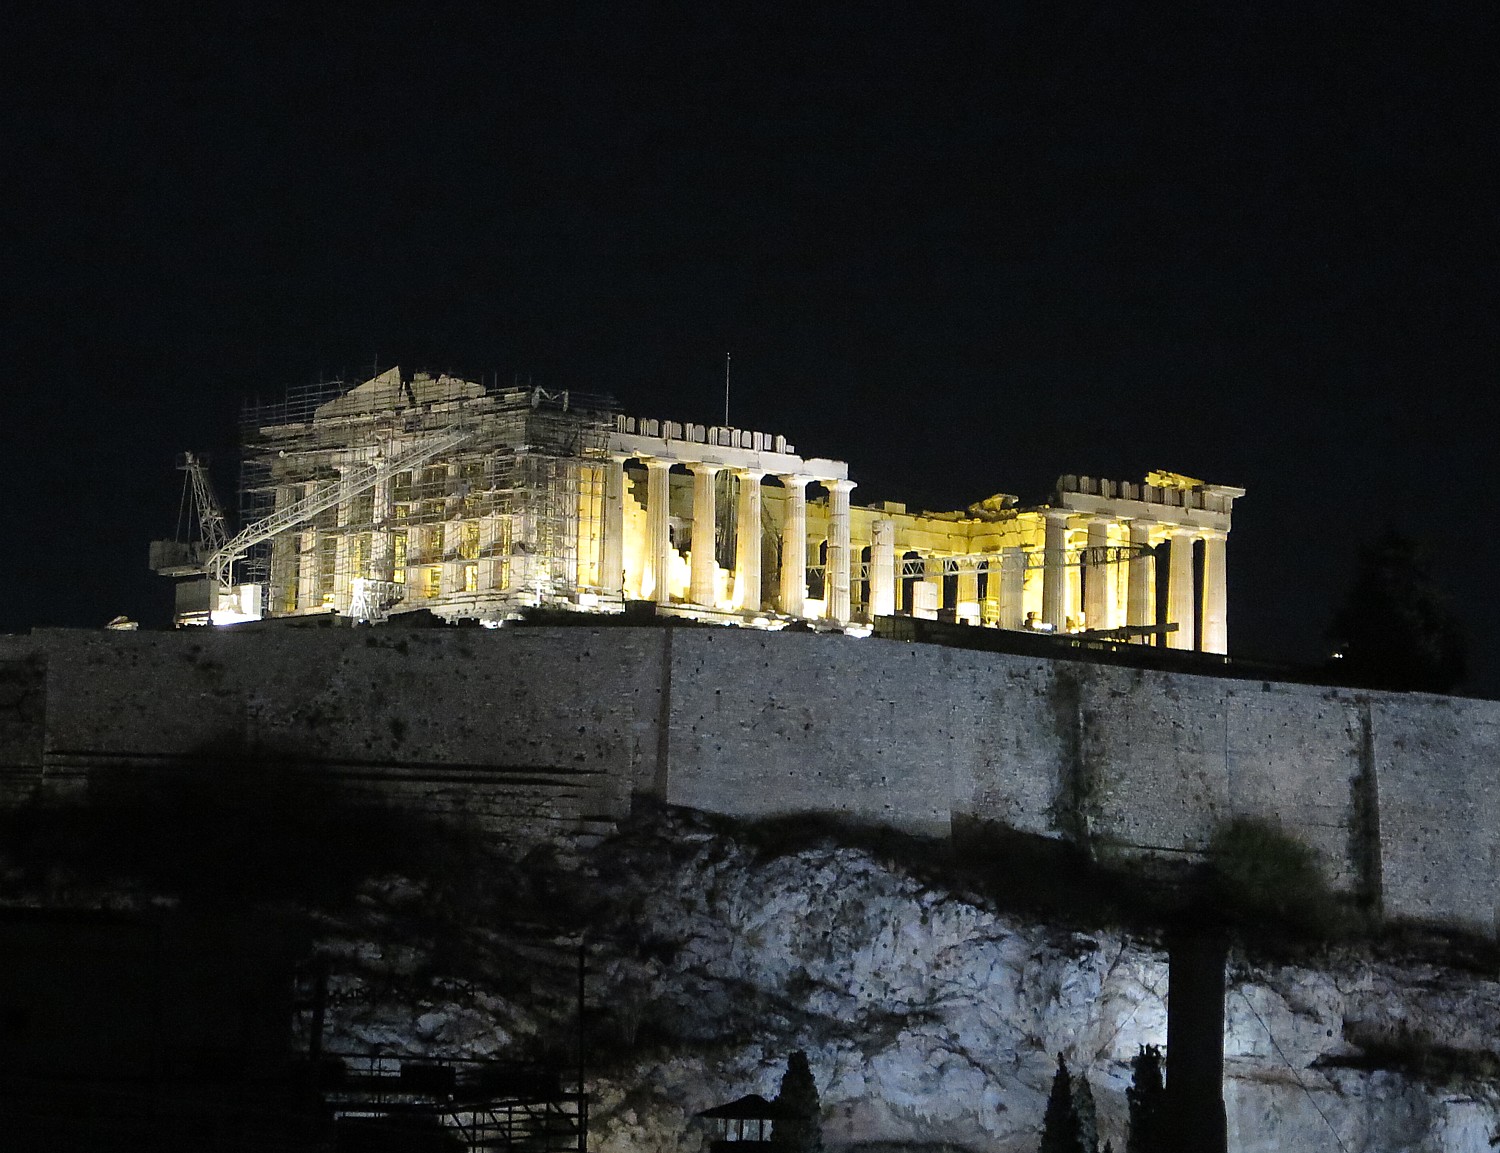 View of Acropolis Hill at night, from Acropolis Hill Hotel's roof garden © 2015 Karen Rubin/news-photos-features.com